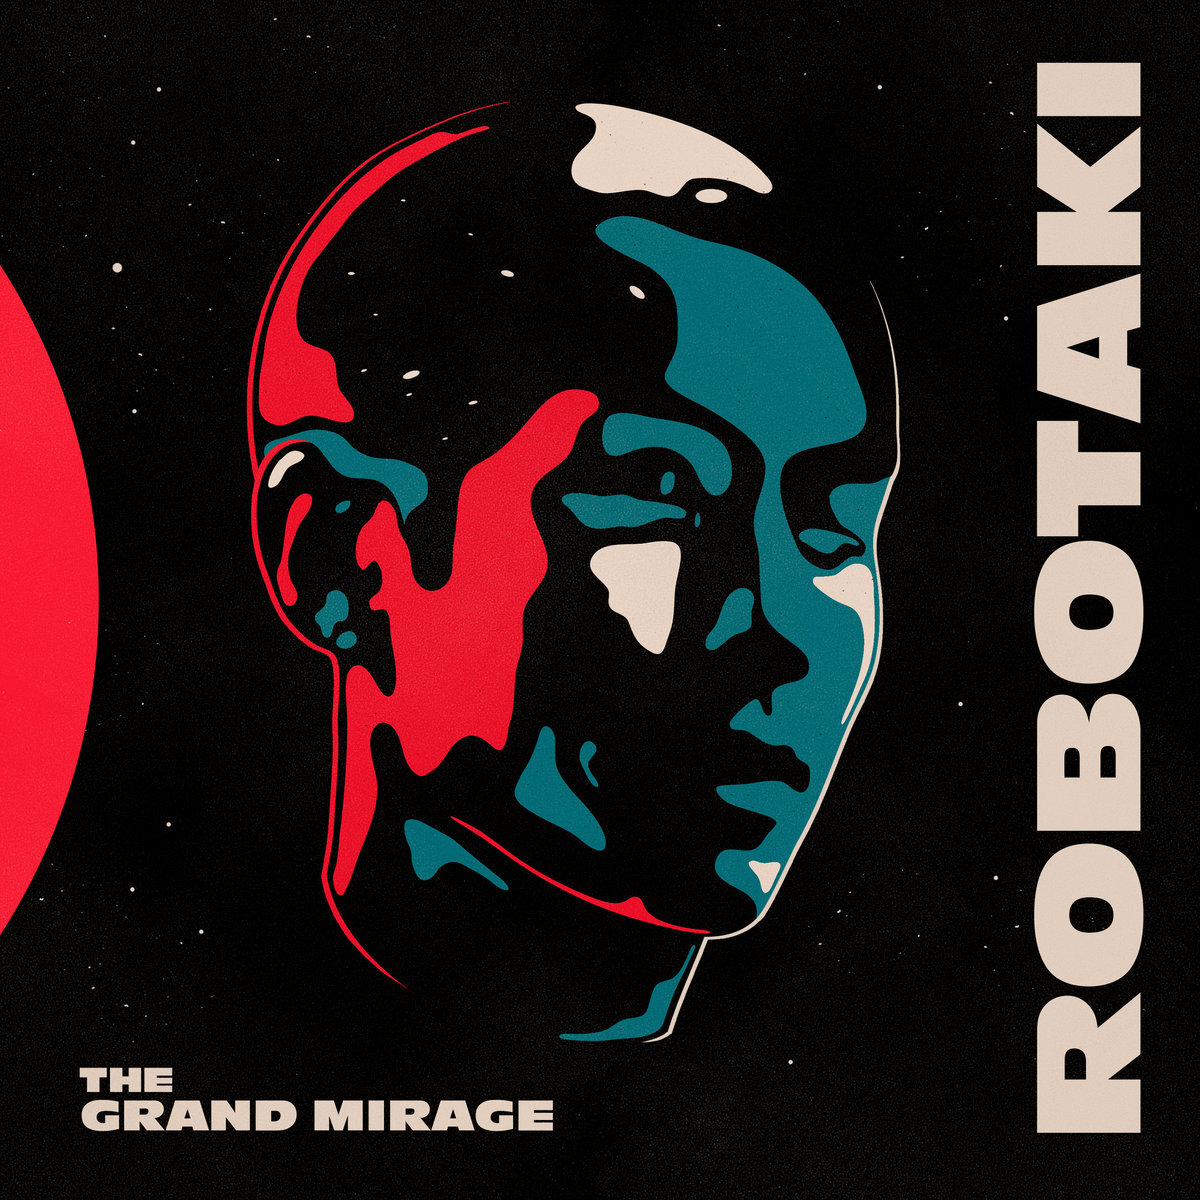 Honorable Mention: The Grand Mirage - Robotaki